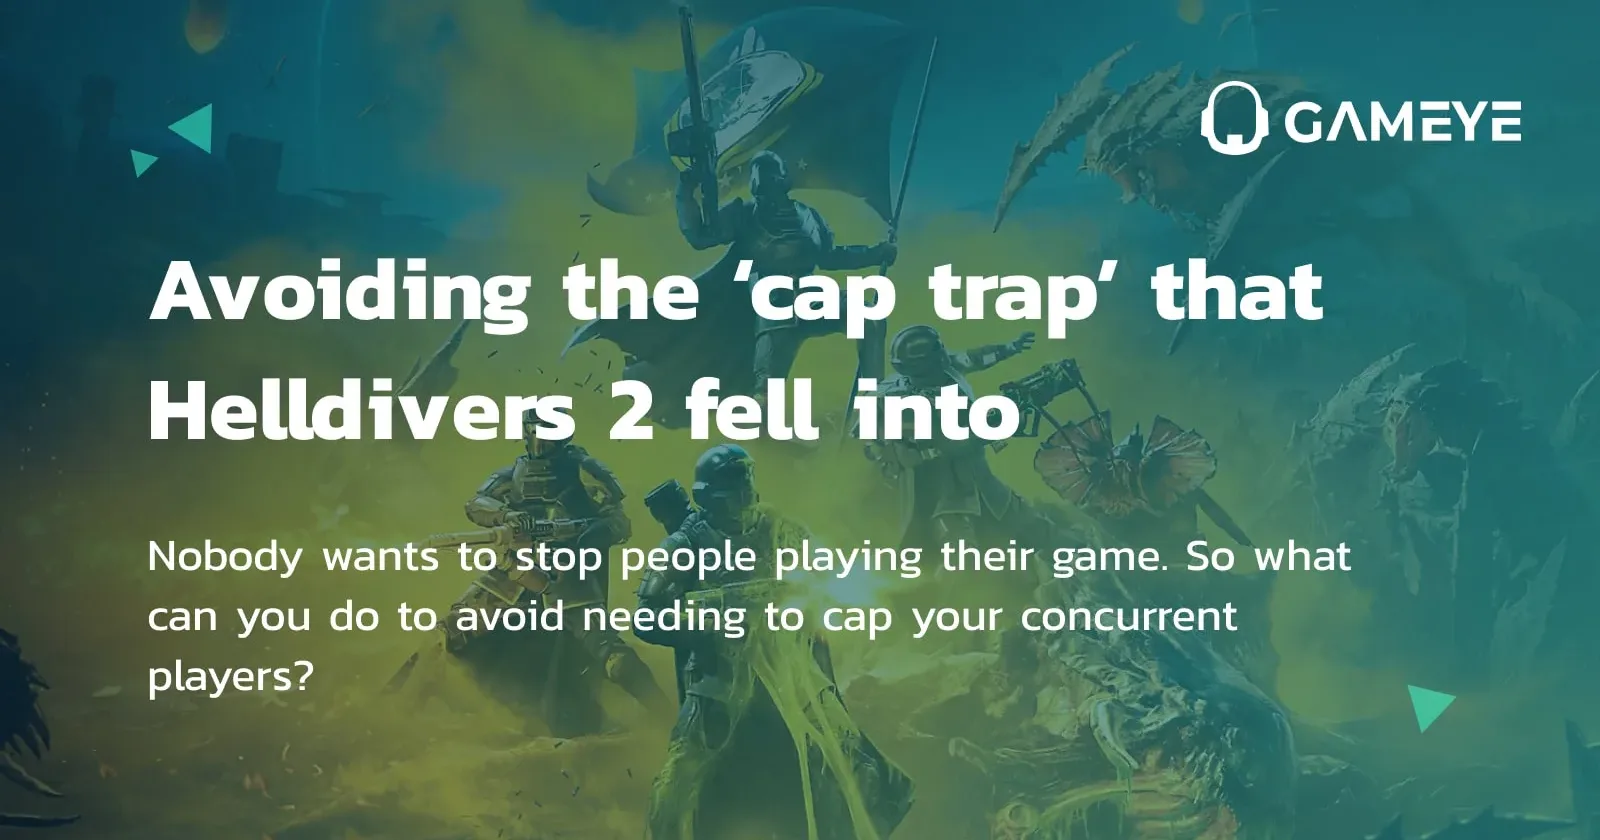 Avoiding the ‘cap trap’ that Helldivers 2 fell into